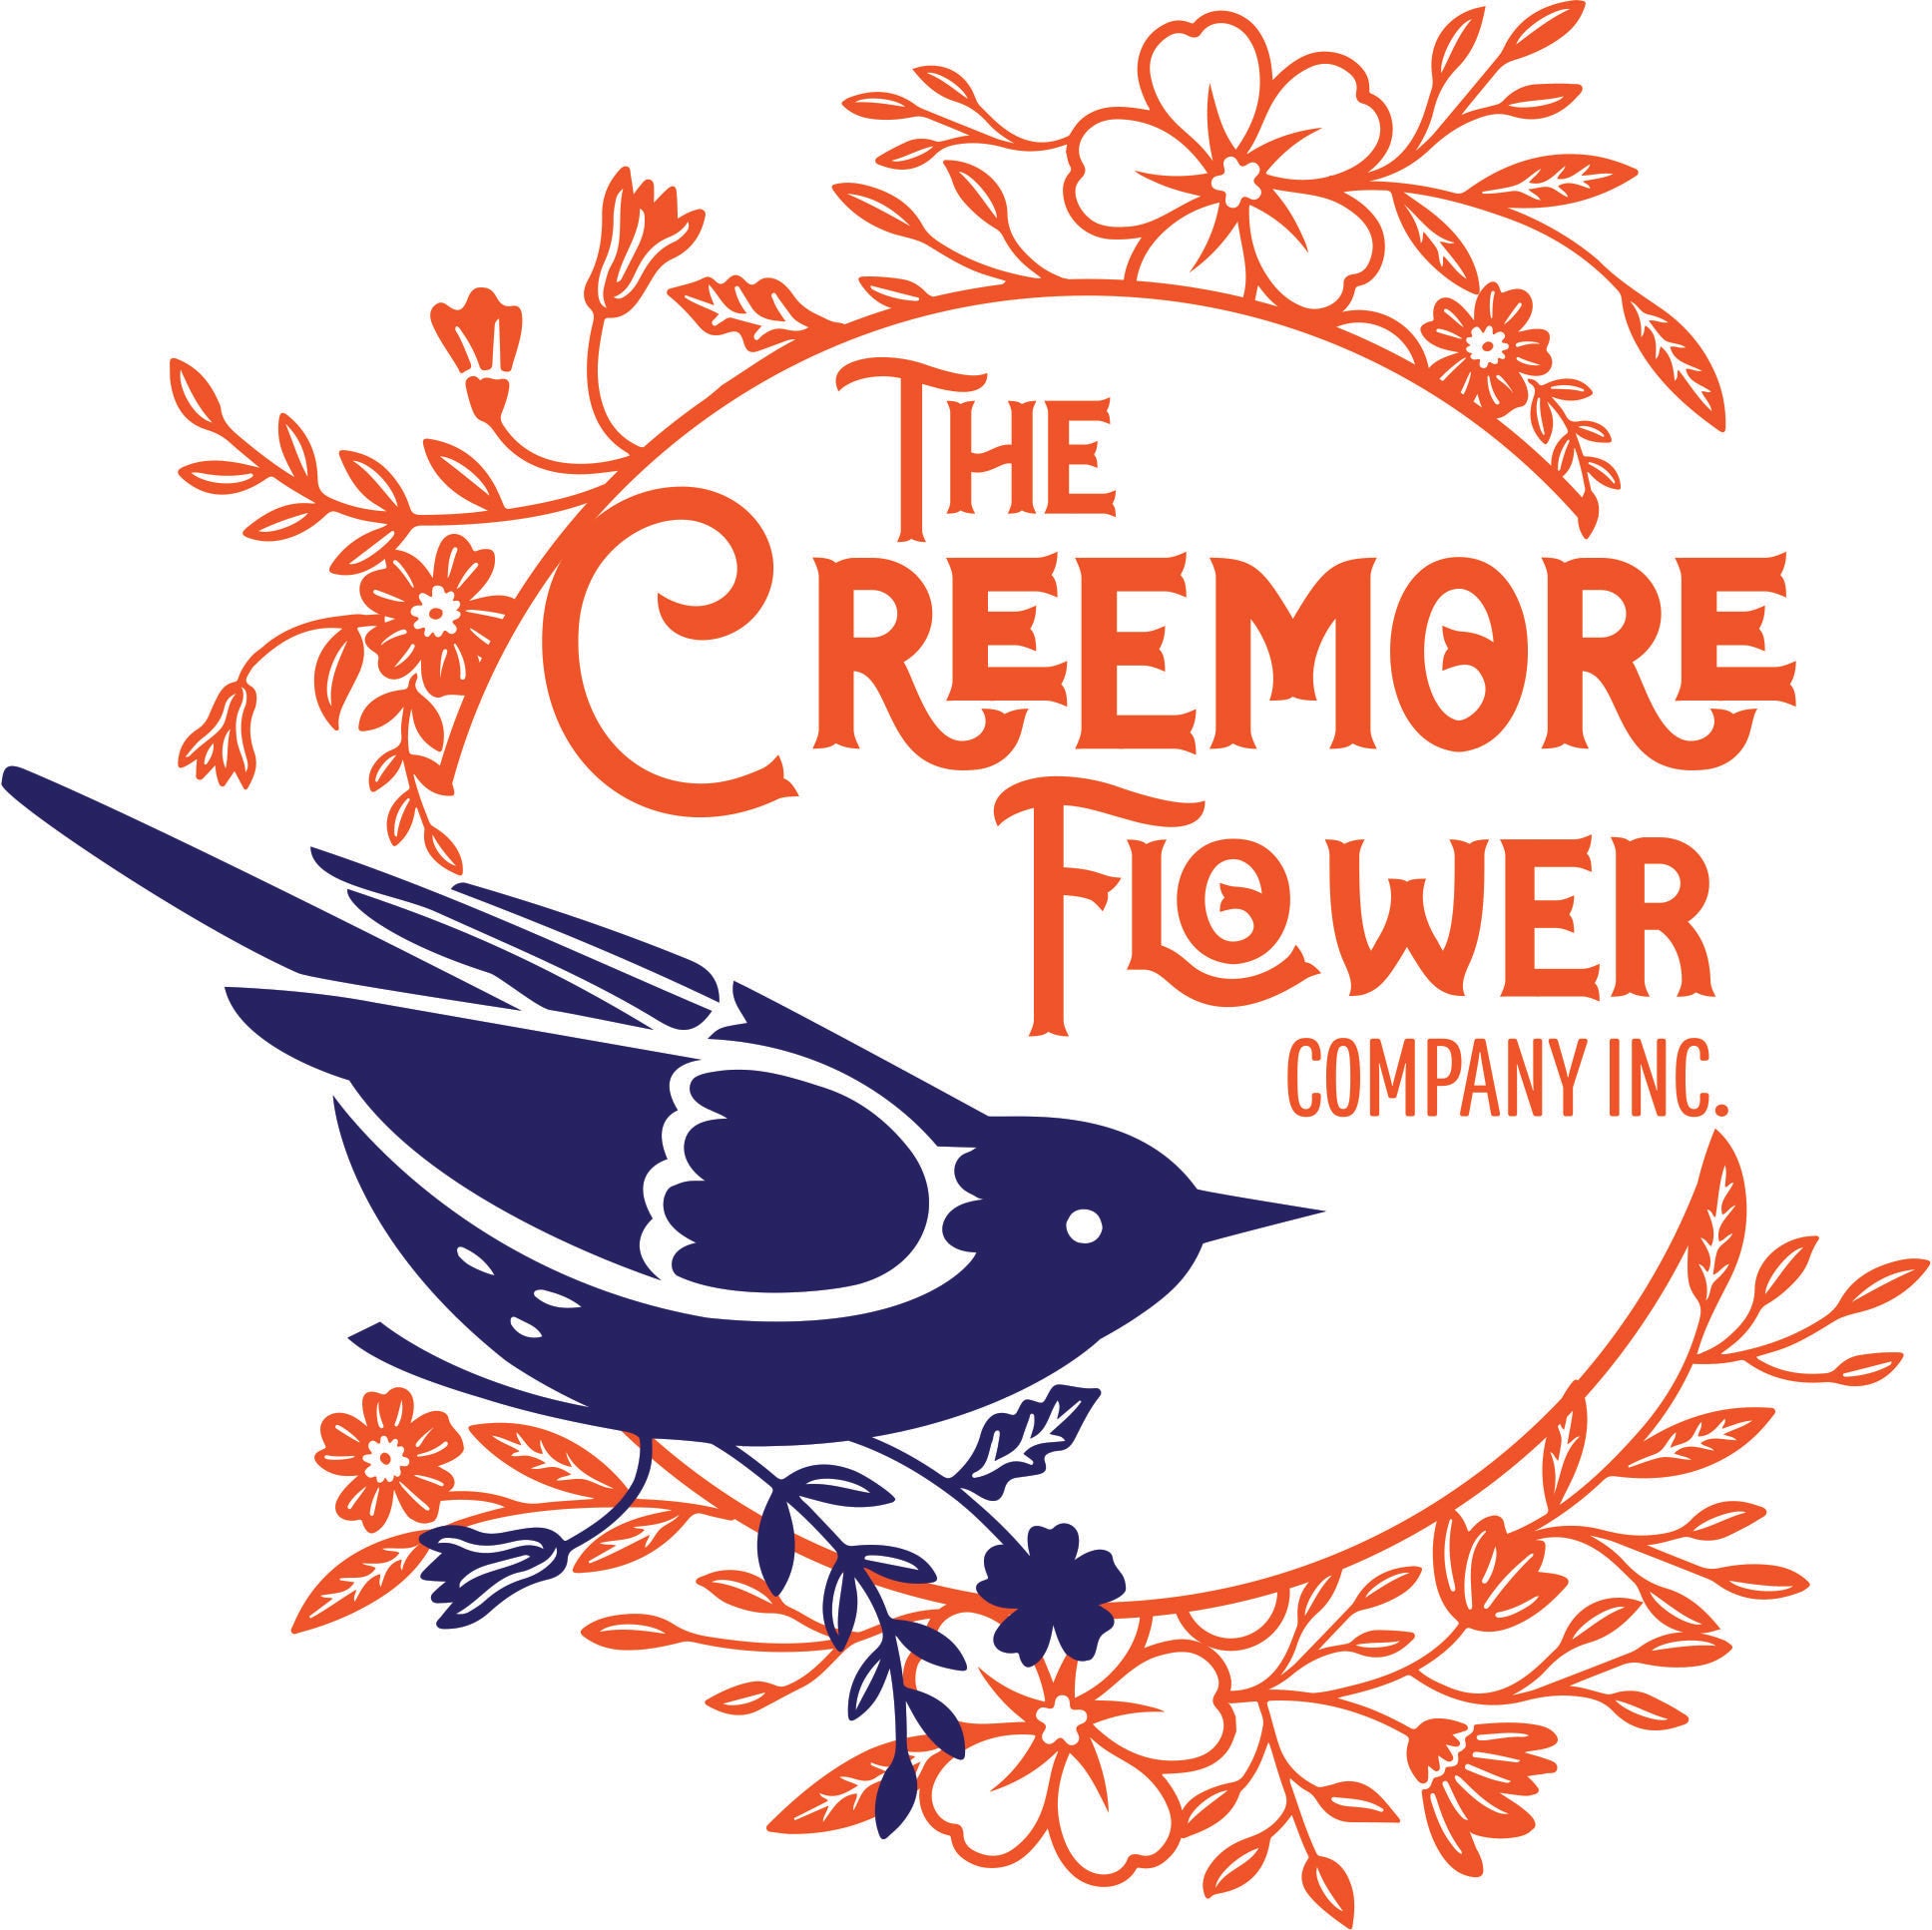 The Creemore Flower Company Inc.